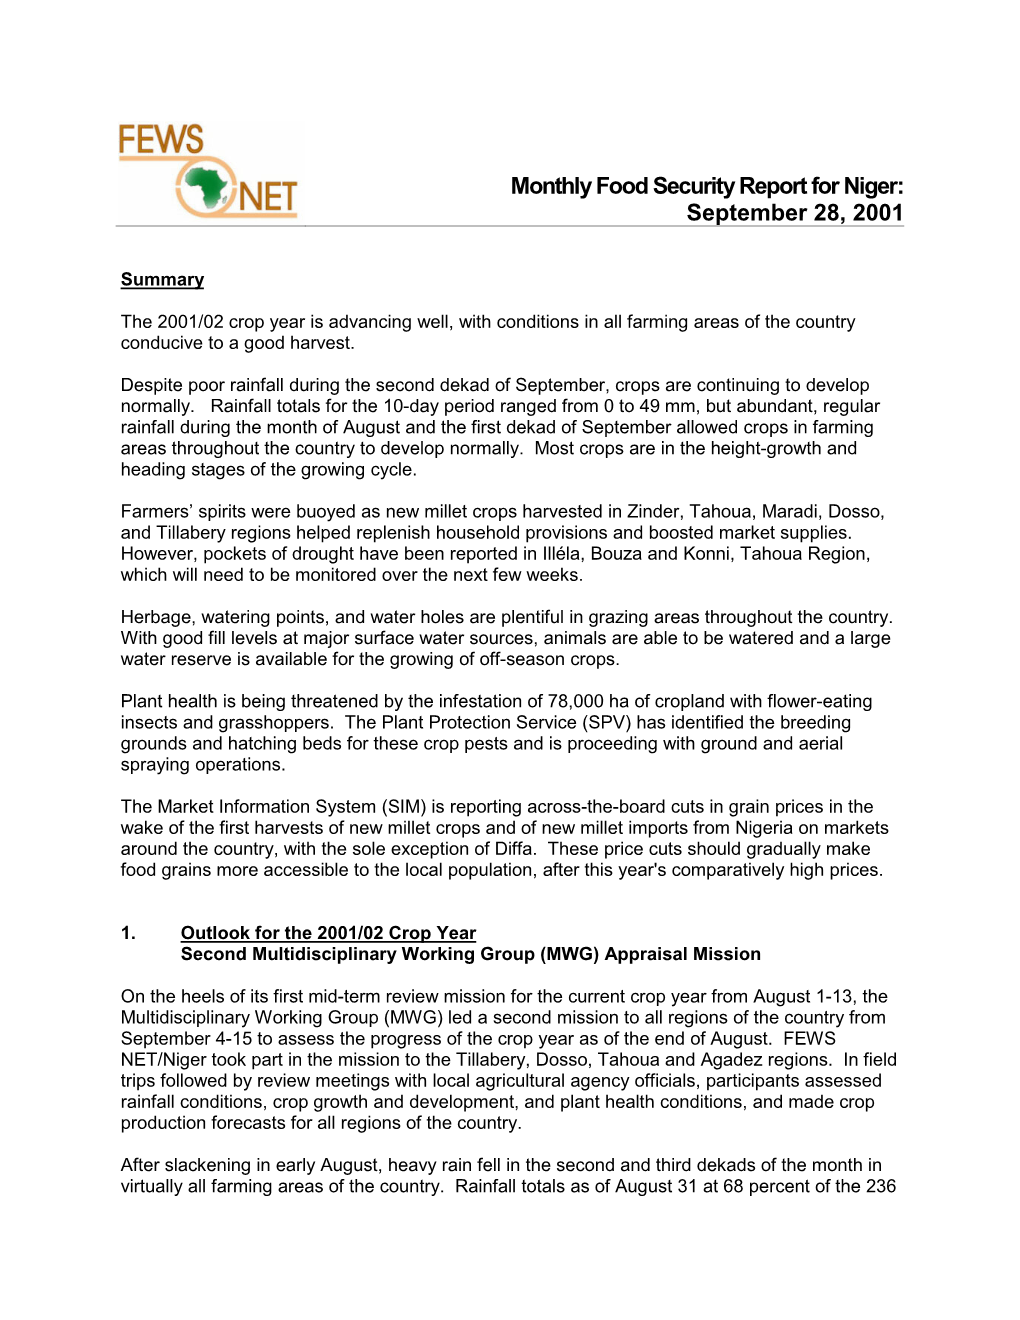 Monthly Food Security Report for Niger: September 28, 2001